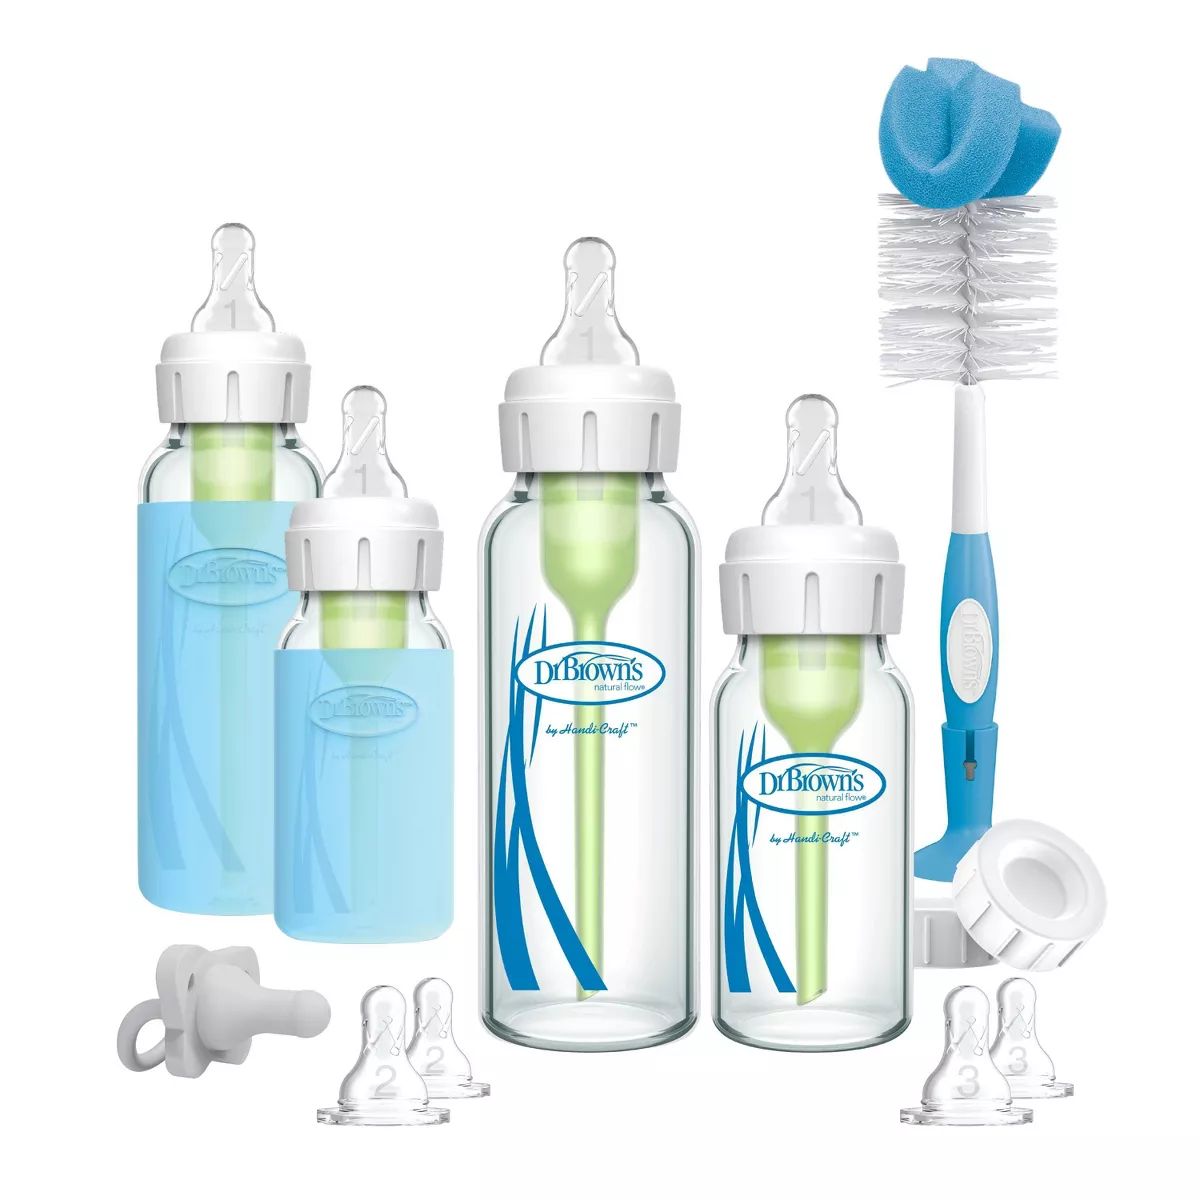 Dr. Brown's Anti-Colic Options+ Glass Baby Bottle Set - 18ct | Target